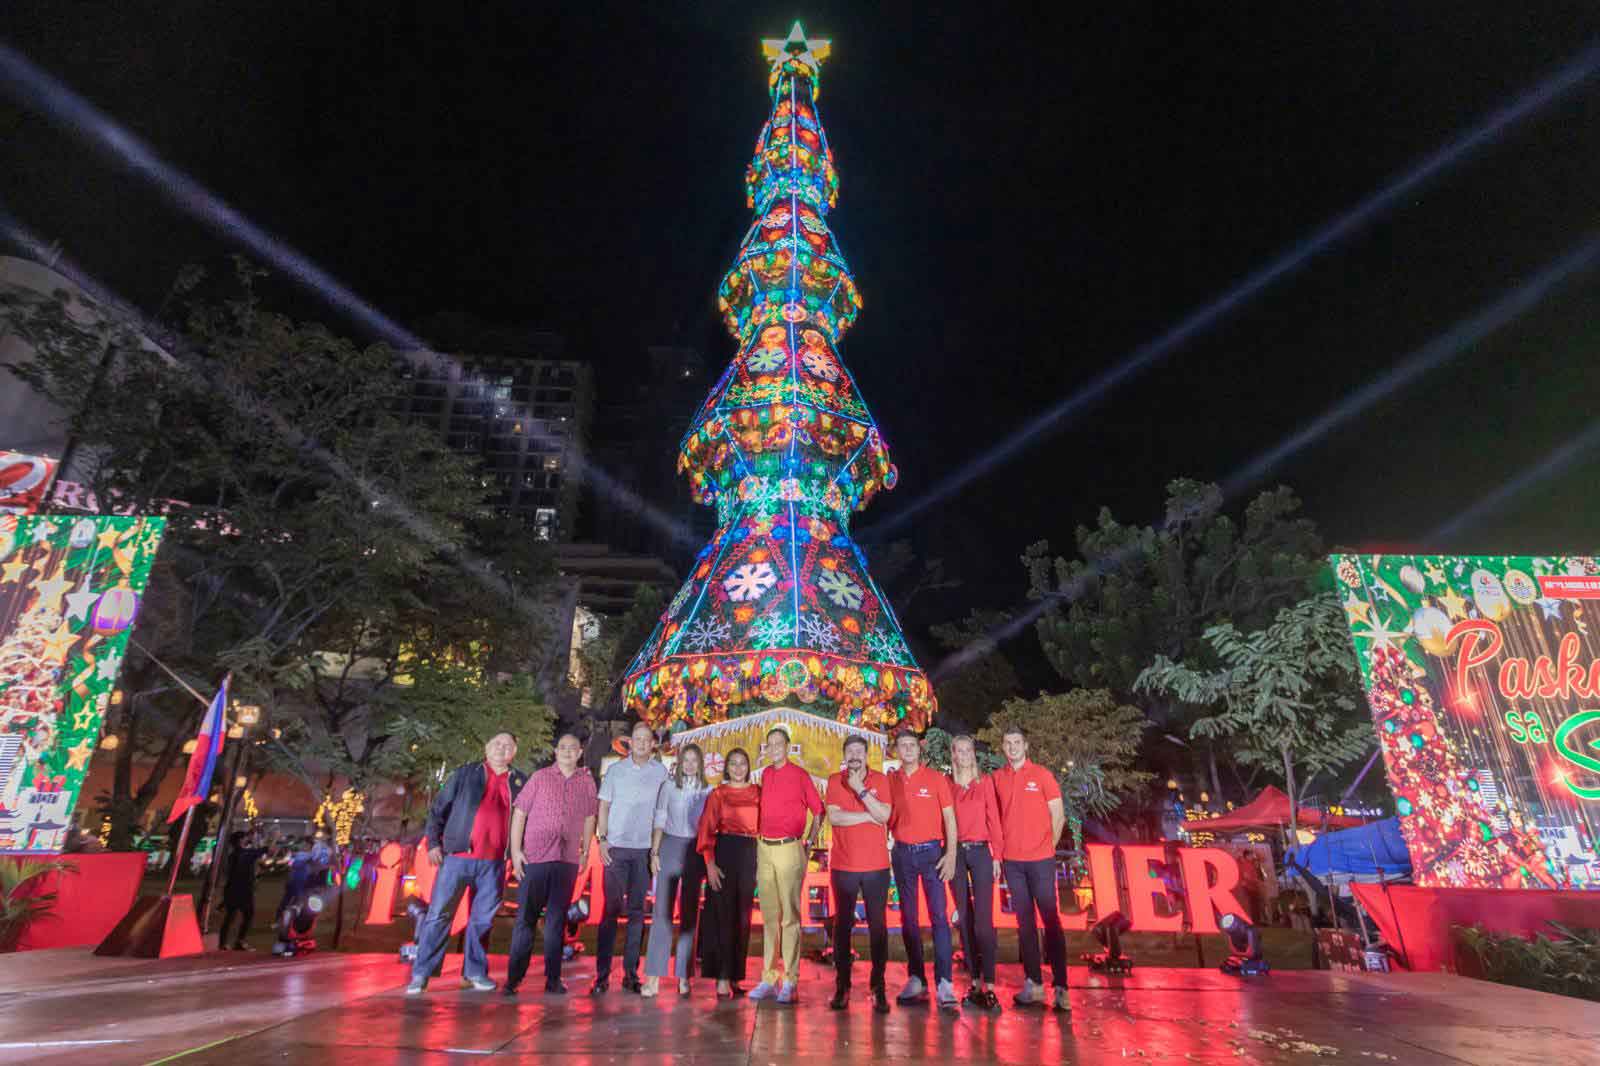 TREE OF HOPE. As part of its long-standing tradition, M. Lhuillier lit up its 120-foot Christmas tree, the tallest in the Visayas, at Fuente Osmeña. Present during the lighting ceremony were Michel Lhuillier, chairman of the board of M Lhuillier Financial Services Inc; his son Michael Lhuillier, president and chief executive officer of M Lhuillier Financial Services Inc; Michael’s son, Michael James; Michael’s wife, Joanna Maitland-Smith Lhuillier, together with Cebu City Mayor Michael Rama and his wife, Malou.